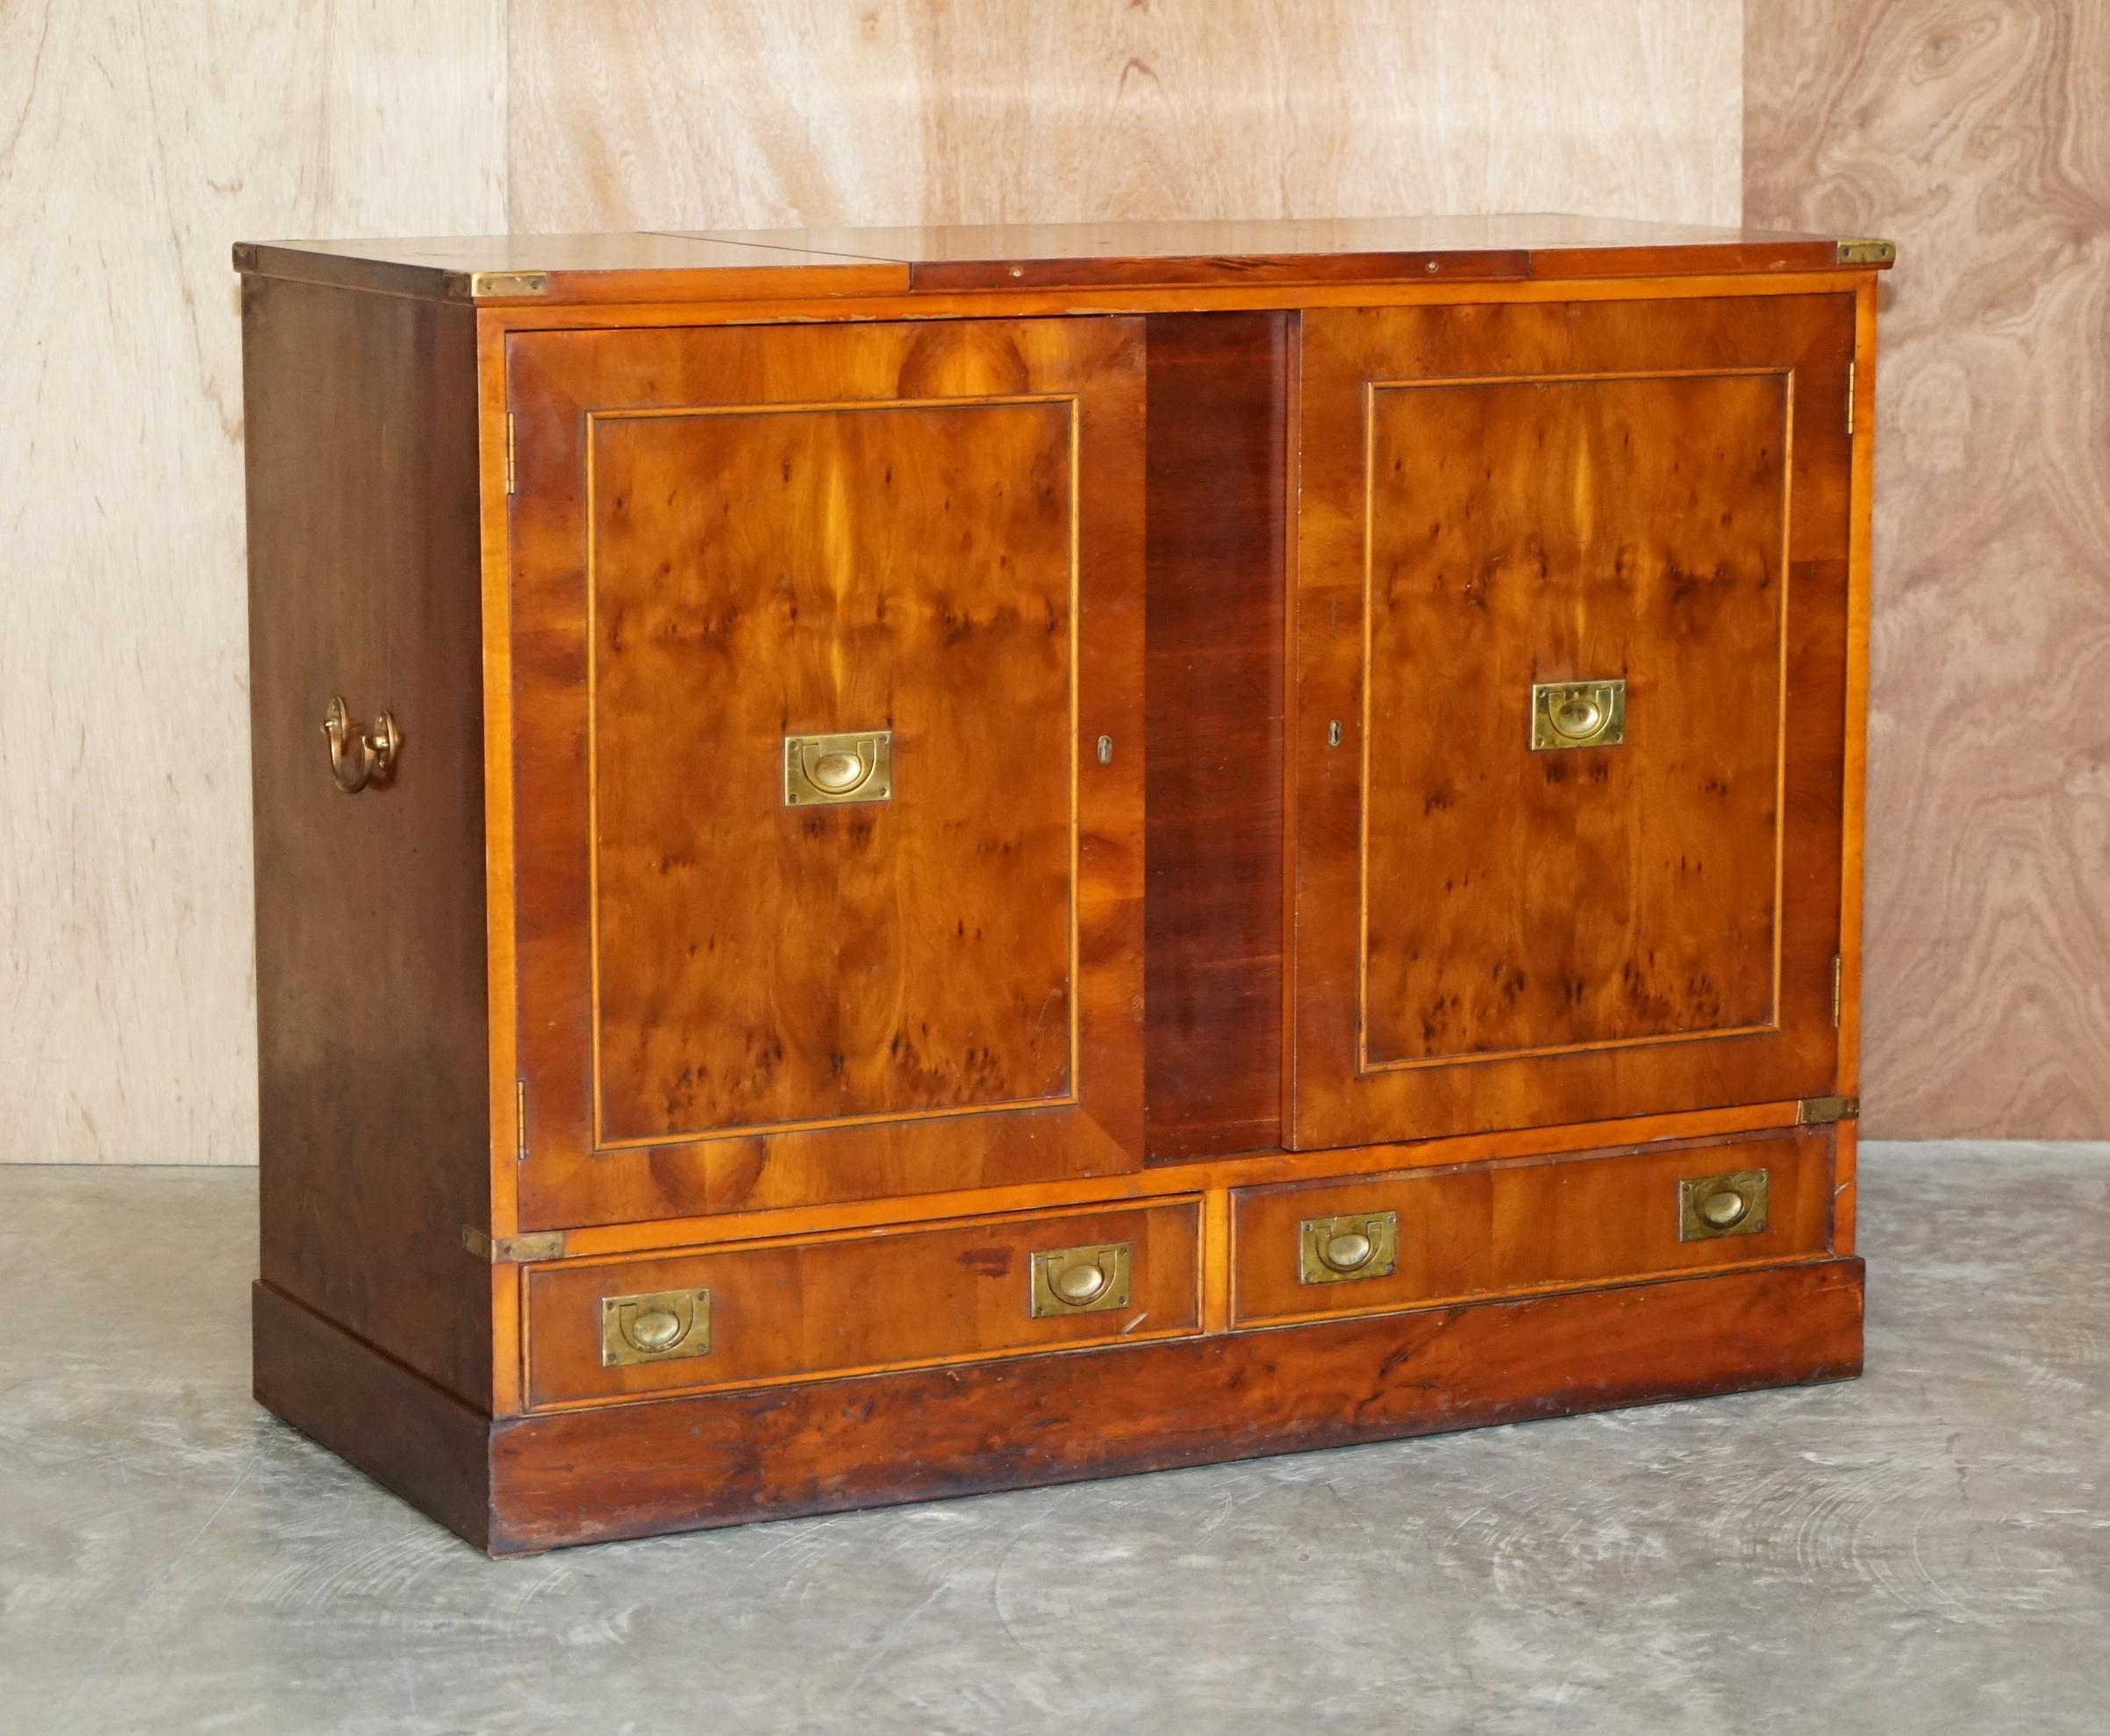 We are delighted to offer this rare vintage burr yew wood military campaign gentleman’s compendium

This piece is based on a Victorian Military Campaign Gentleman’s dressing table. You would have drawers for folded linens, a cupboard section for a